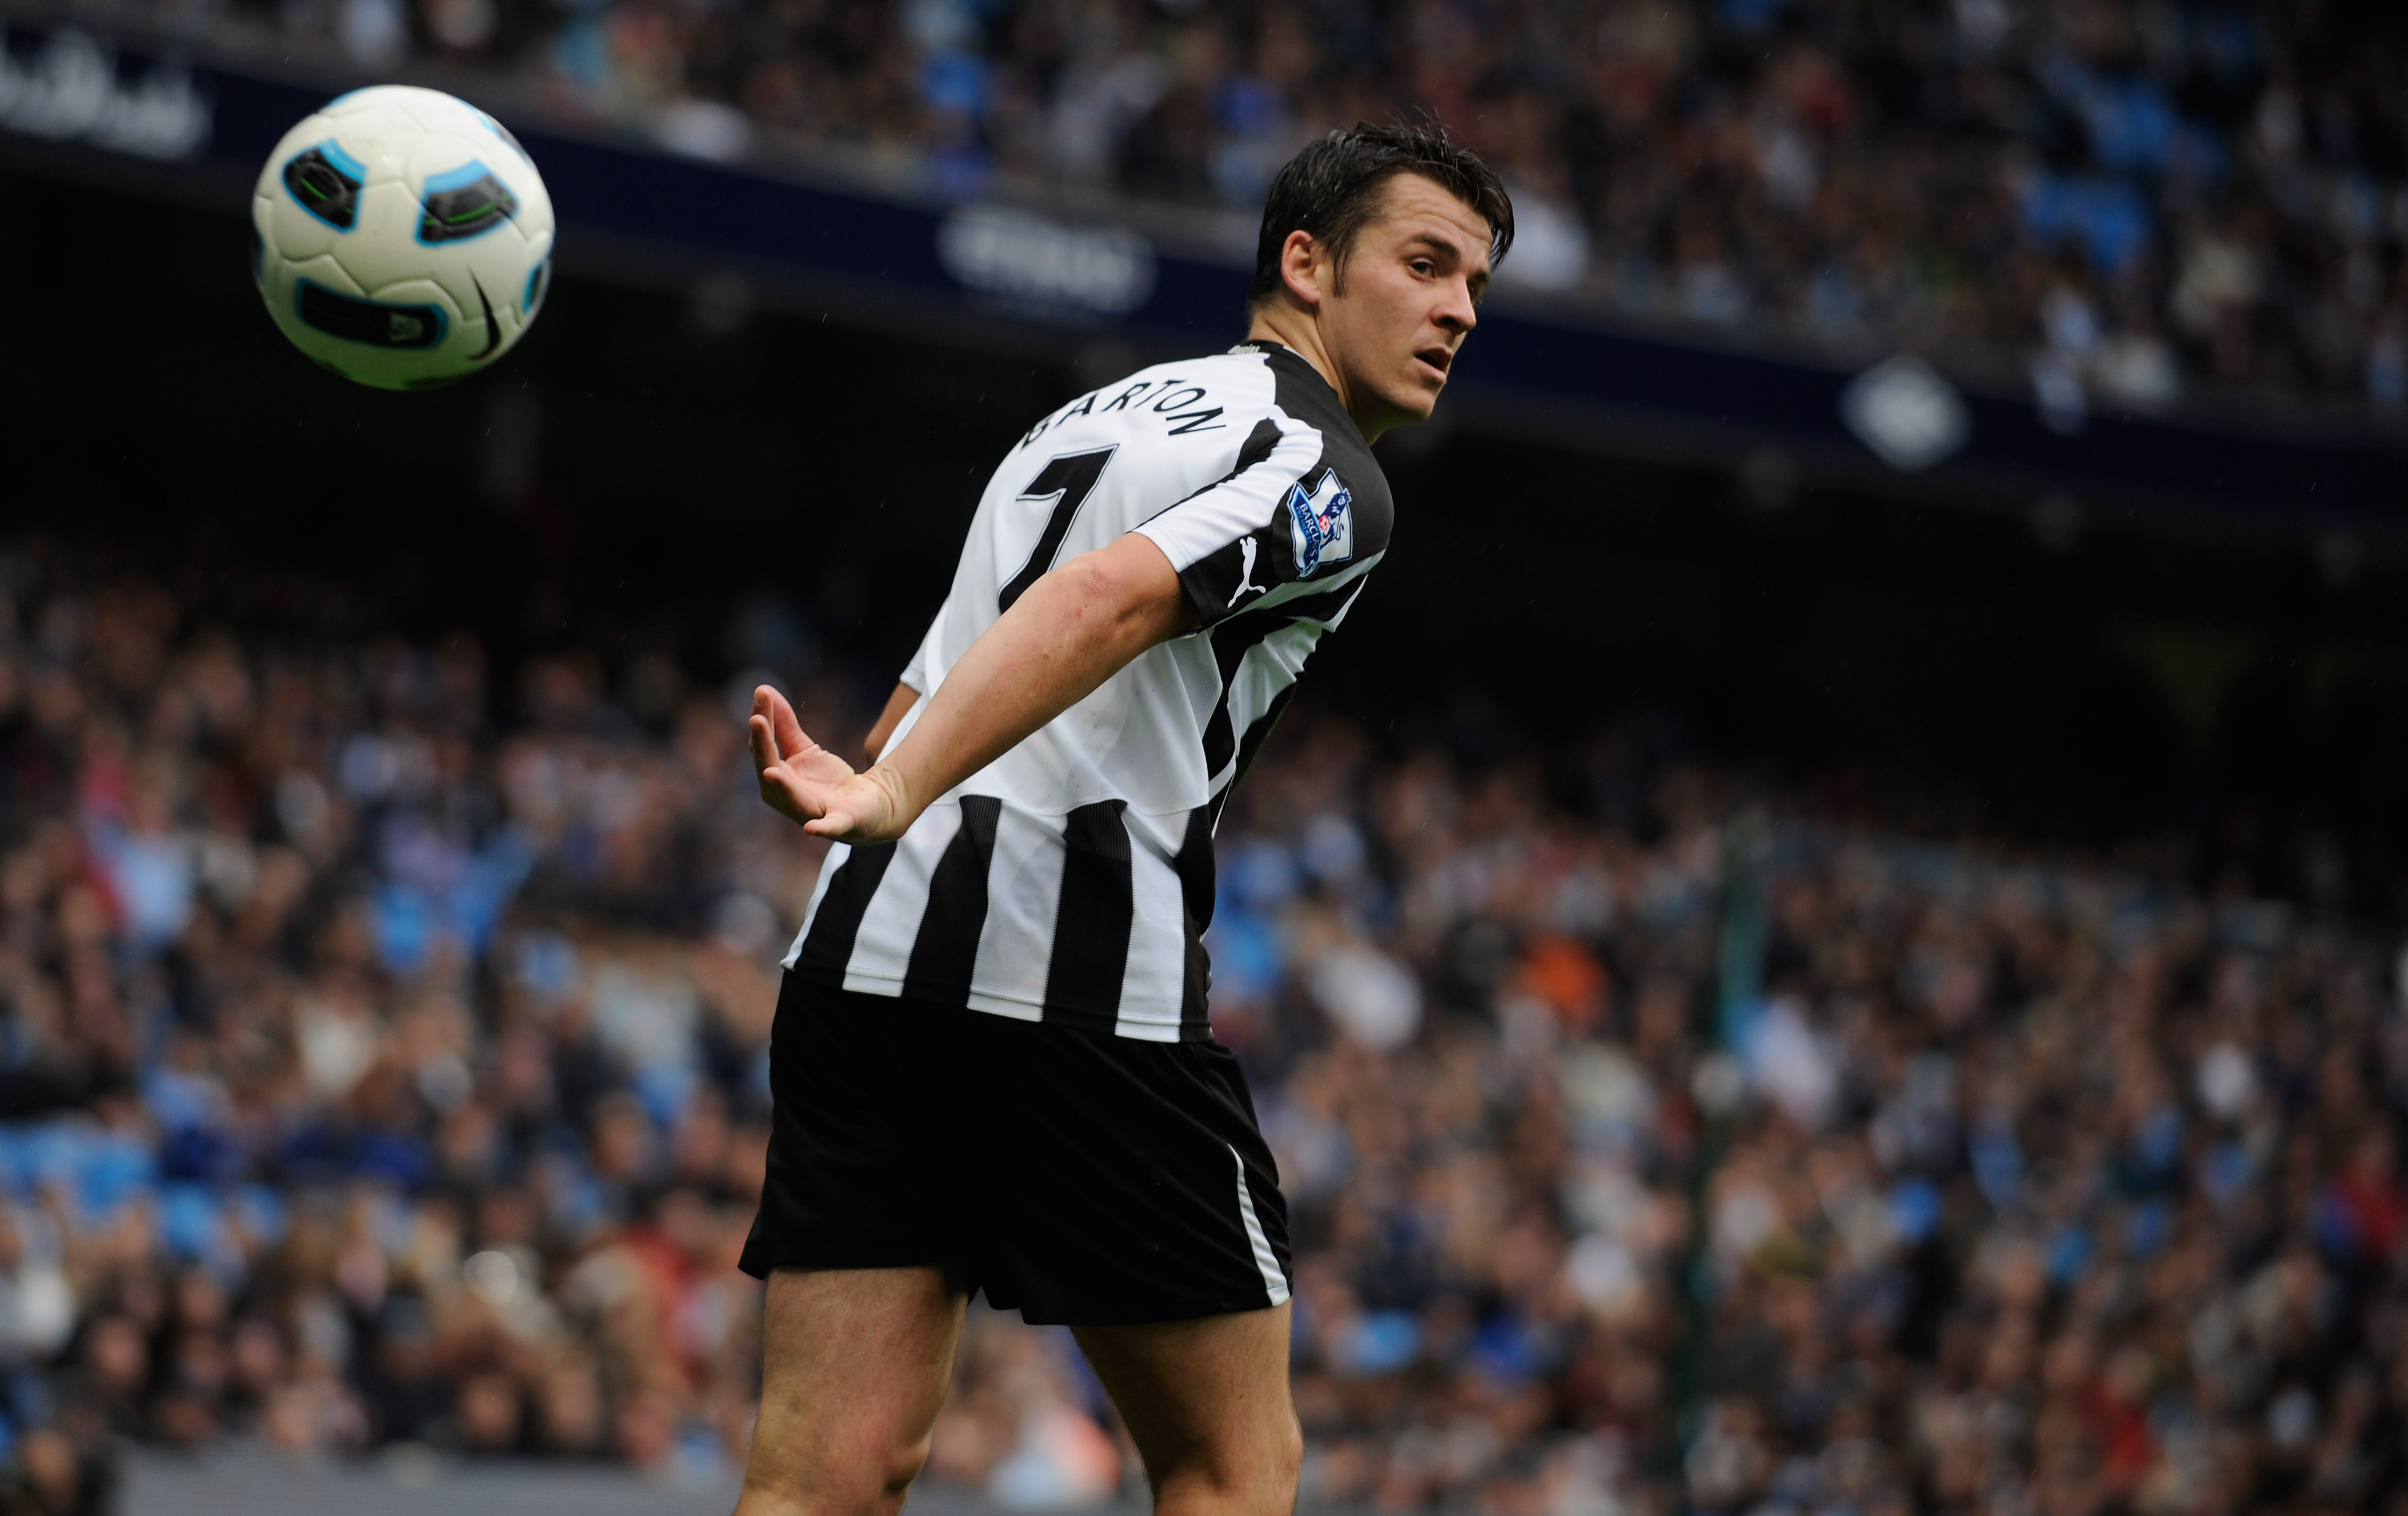 MANCHESTER, ENGLAND - OCTOBER 03: Joey Barton of Newcastle throws the ball during the Barclays Premier League match between Manchester City and Newcastle United at the City of Manchester Stadium on October 3, 2010 in Manchester, England.  (Photo by Michae